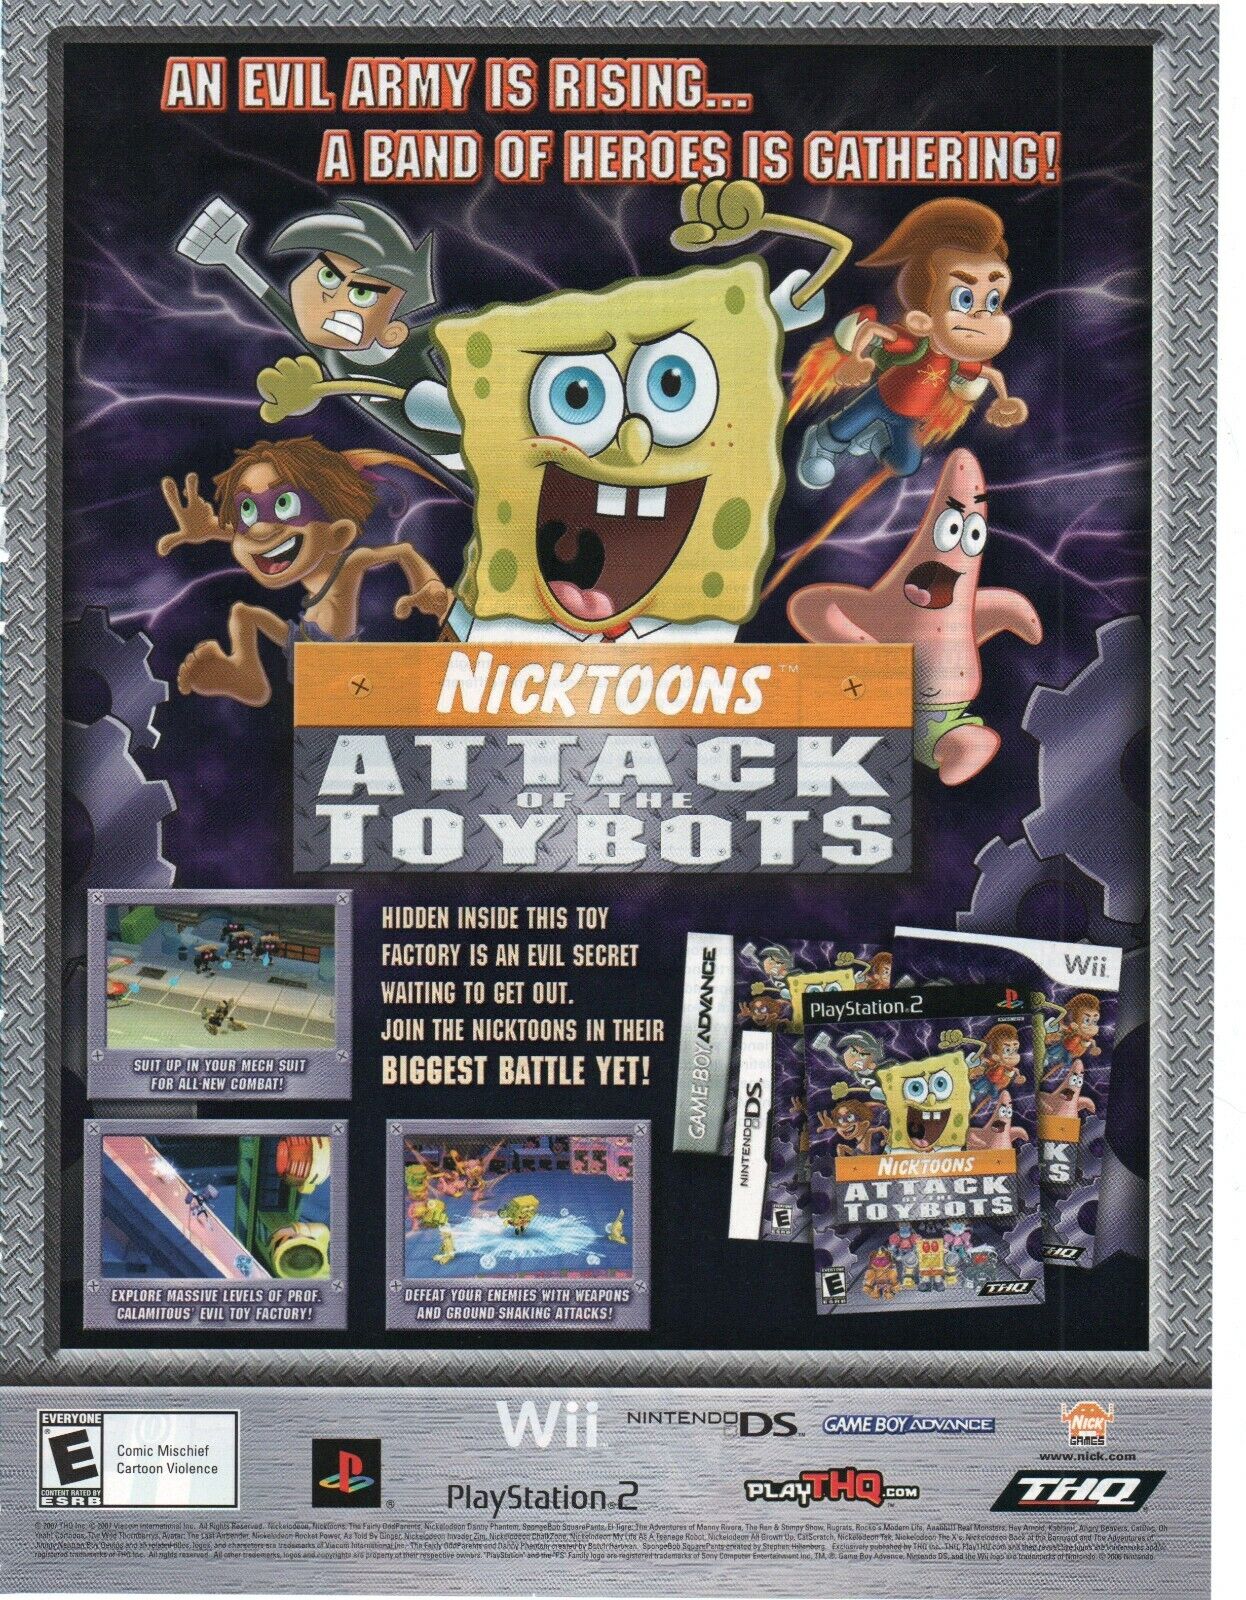 2007 Nicktoons Attack of the Toybots PS2 Wii GBA Promo Video Game Ad RARE